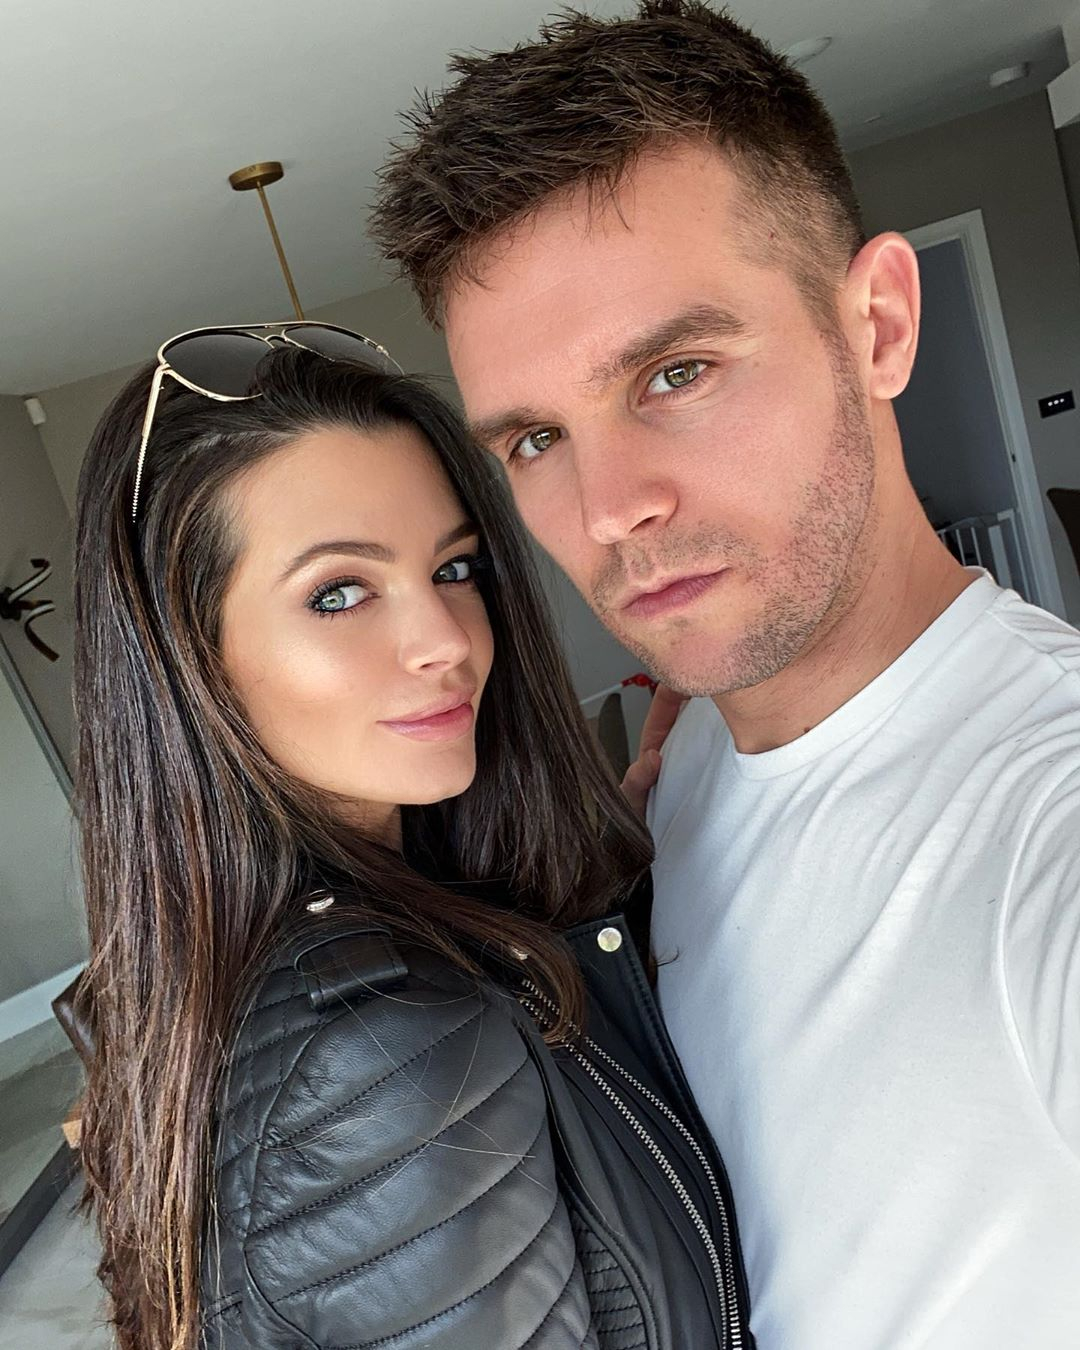 Geordie Shore’s Gaz Beadle Opens Up on Social Media After Split from Emma